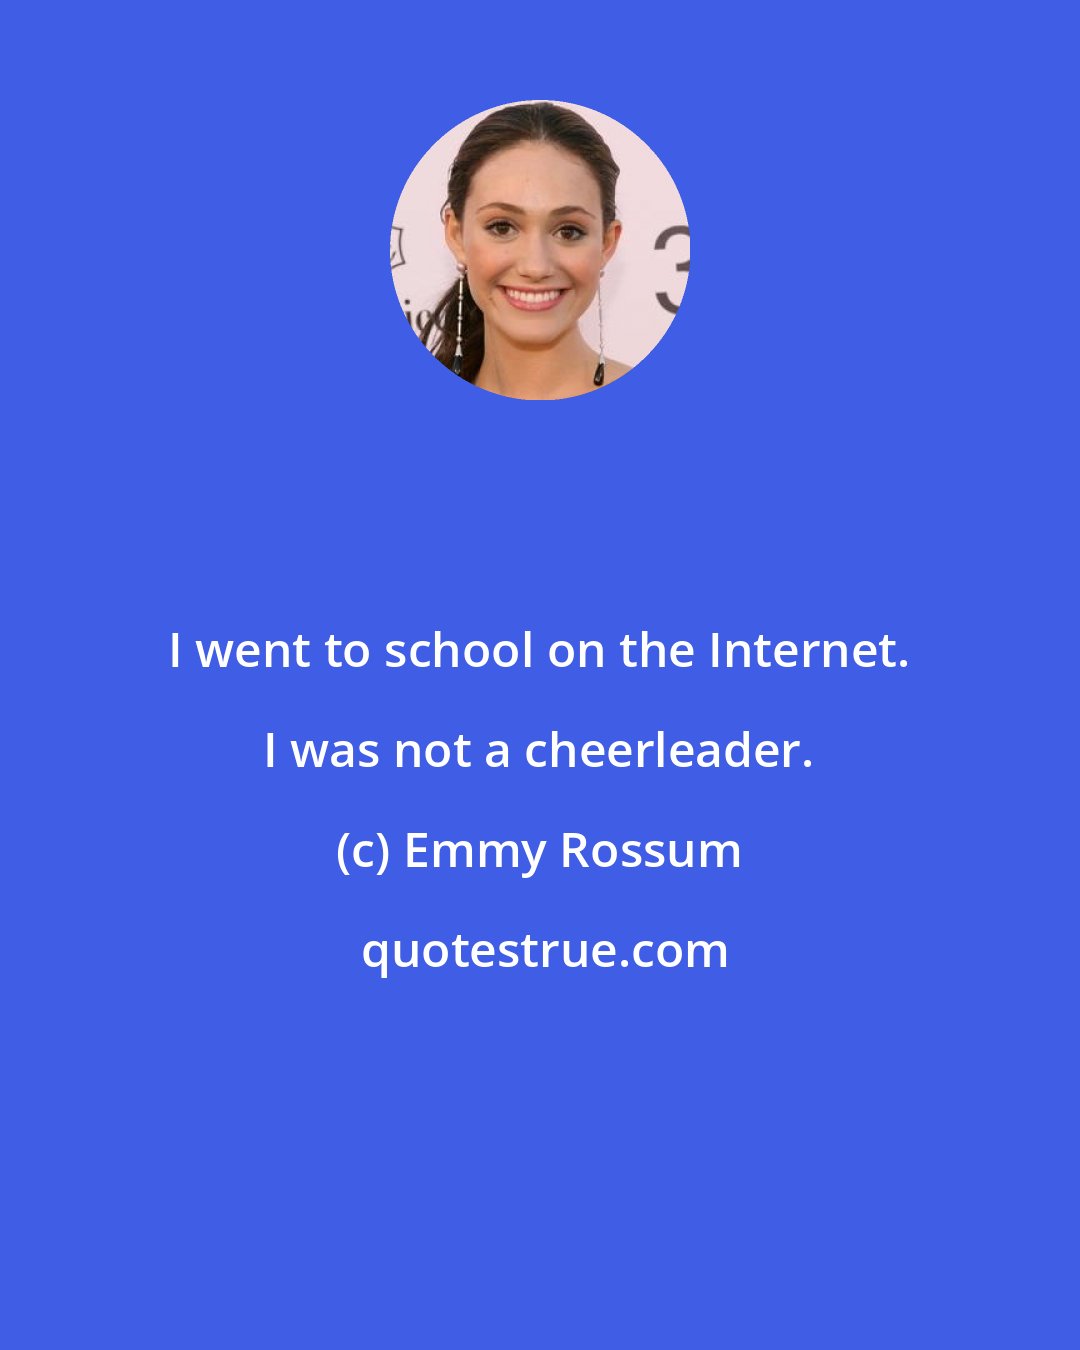 Emmy Rossum: I went to school on the Internet. I was not a cheerleader.